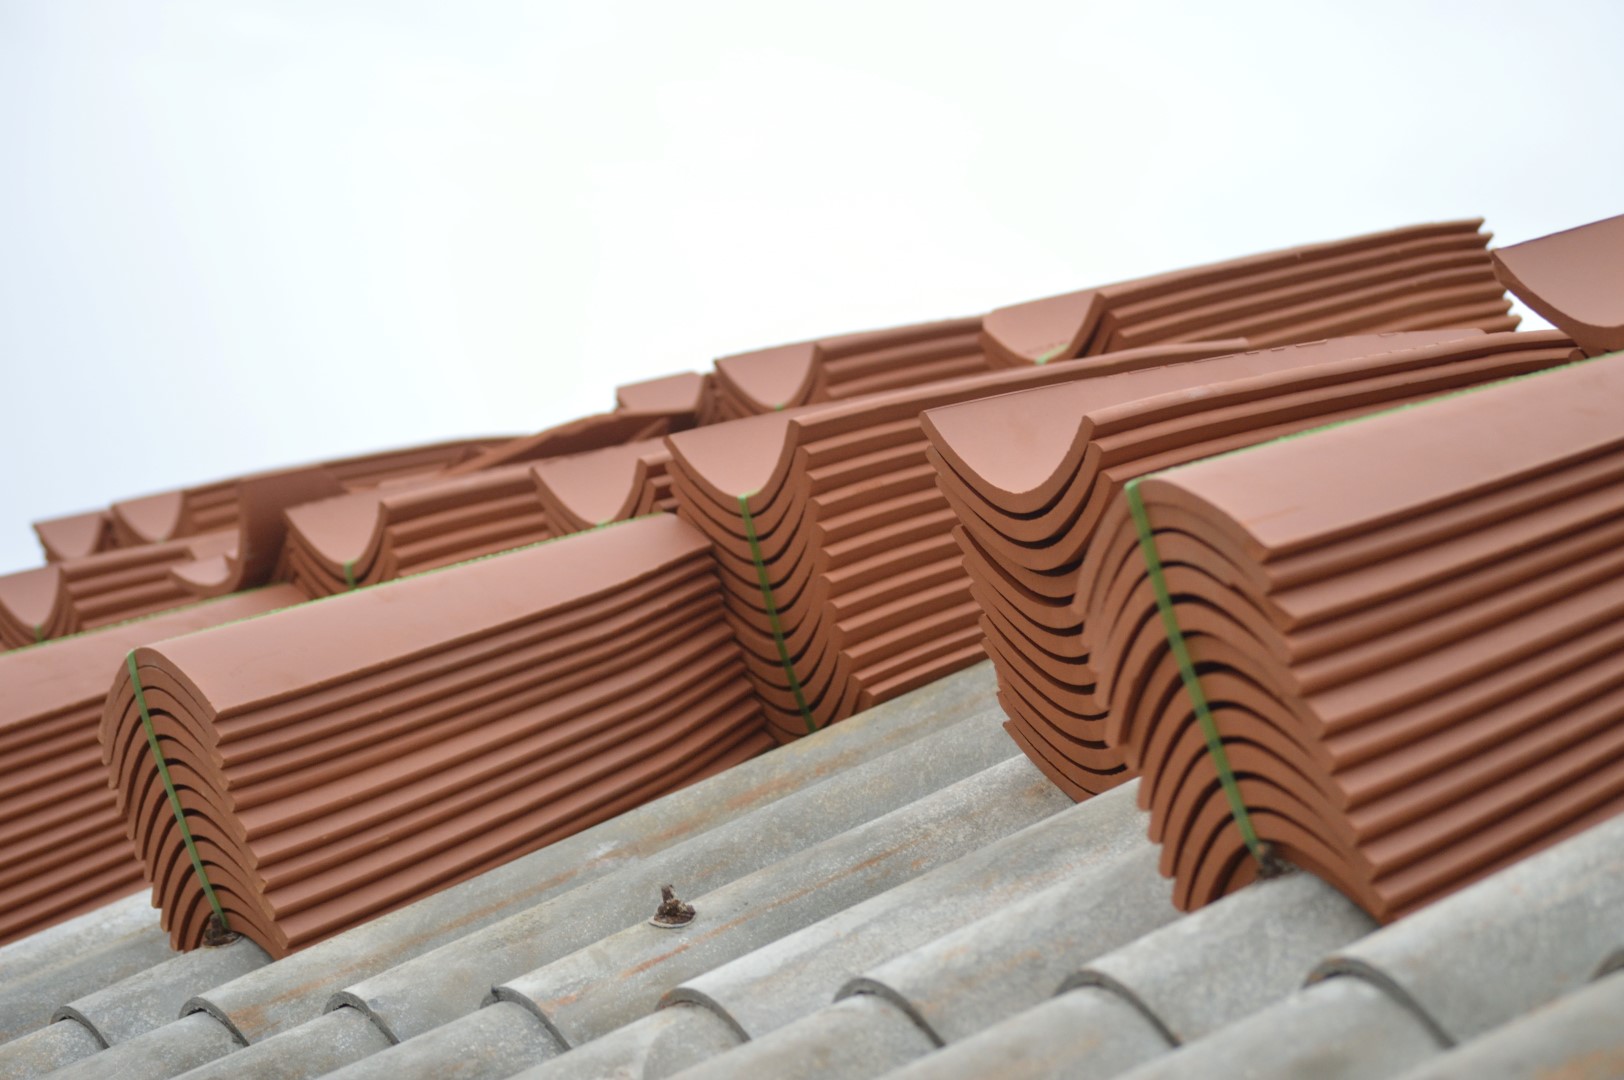 Stack of clay tiles for construction